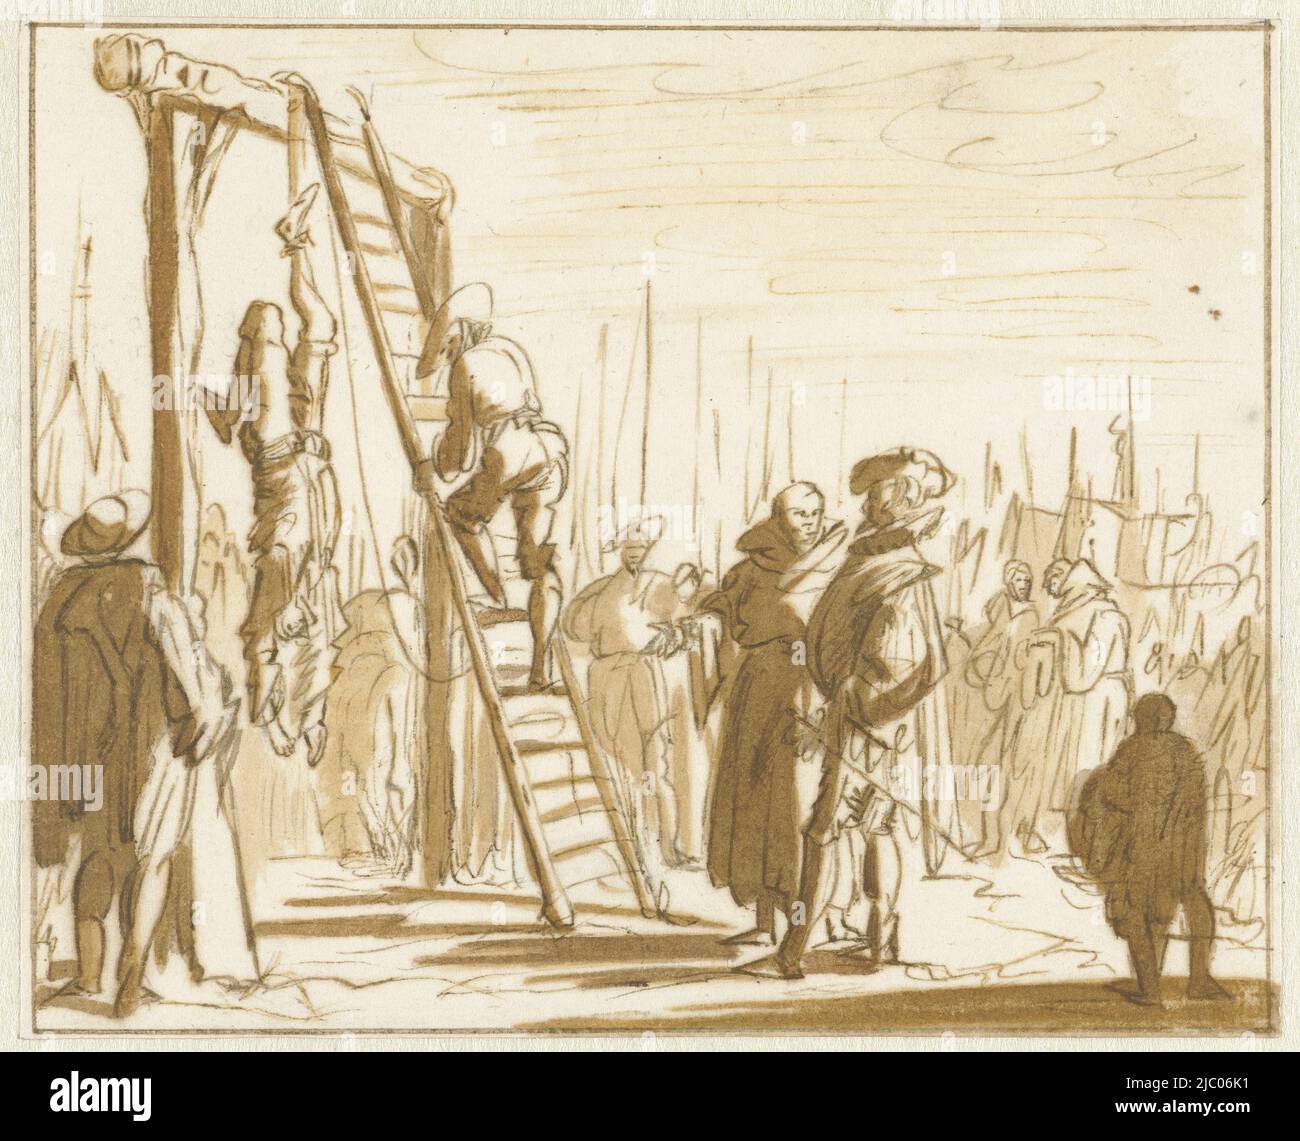 Jan Smit hung from one leg on the gallows, on the Grote Markt in Haarlem, 1572. Design for a print, Jan Smit hung on one leg in Haarlem., draughtsman: Jan Luyken, 1683 - 1685, paper, pen, brush, h 109 mm × w 136 mm Stock Photo